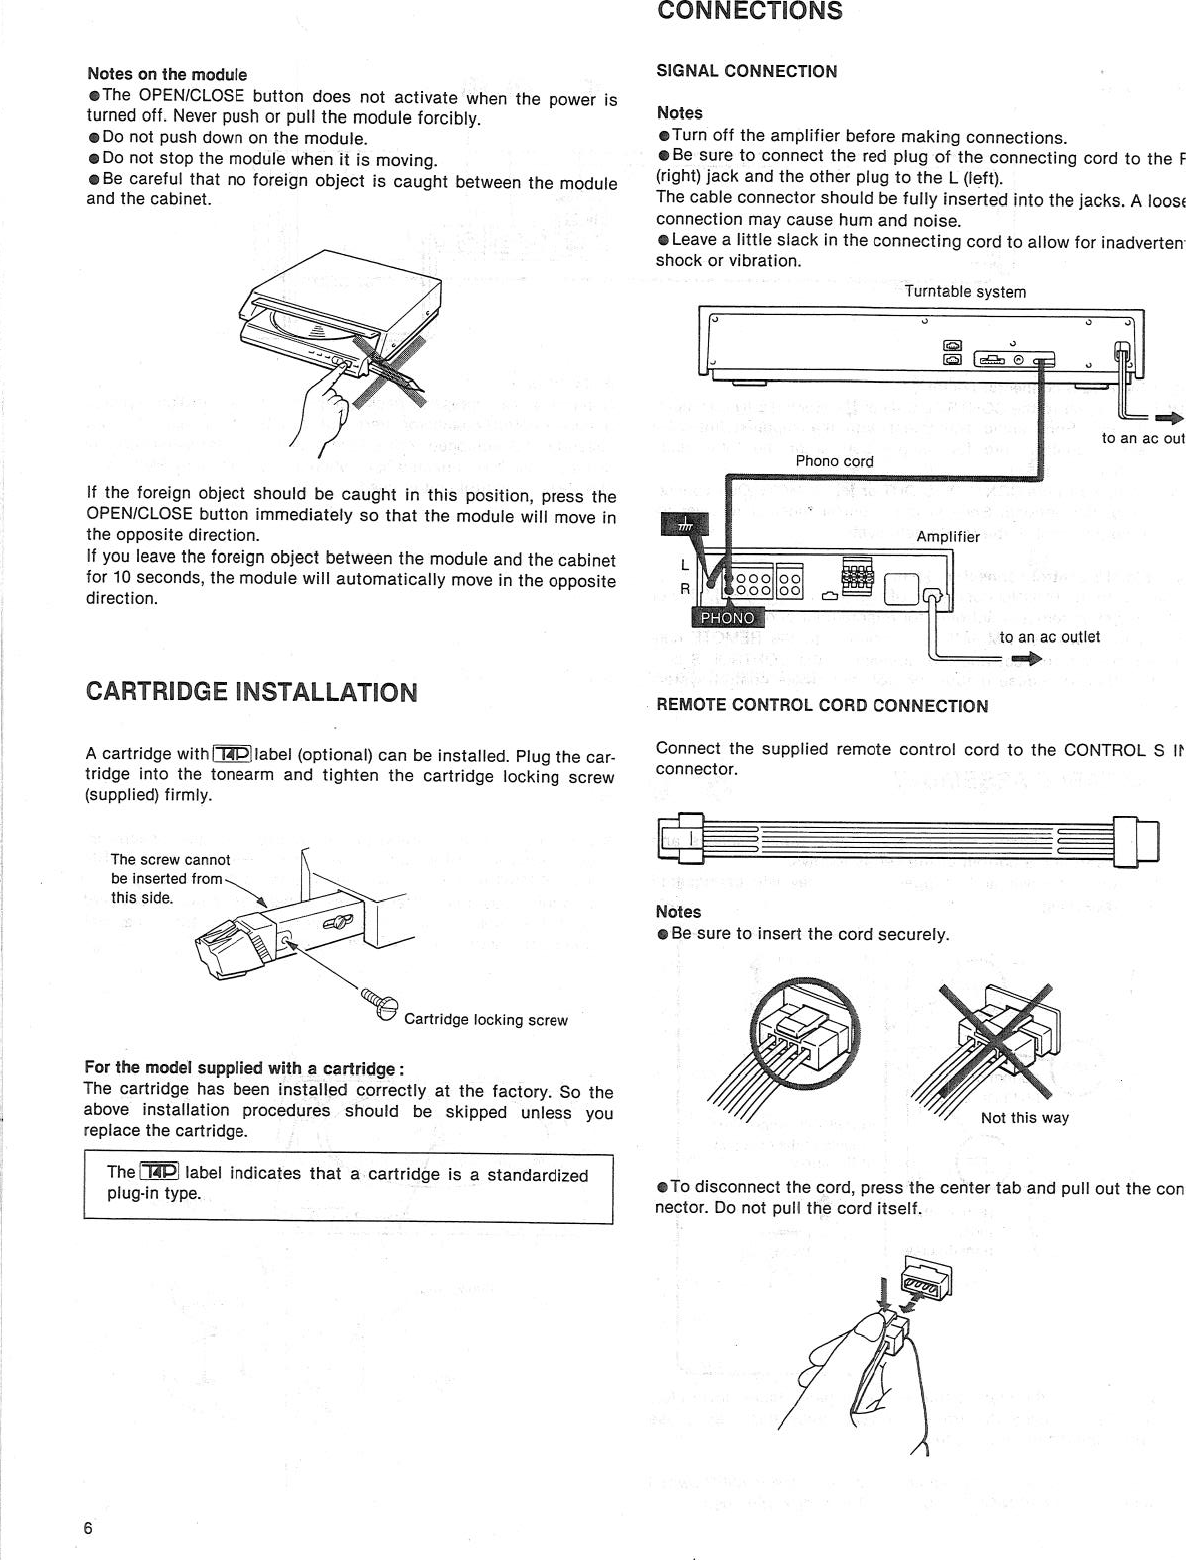 Page 6 of 11 - Sony Sony-Sony-Turntable-Ps-Fl7-Ii-Users-Manual-  Sony-sony-turntable-ps-fl7-ii-users-manual